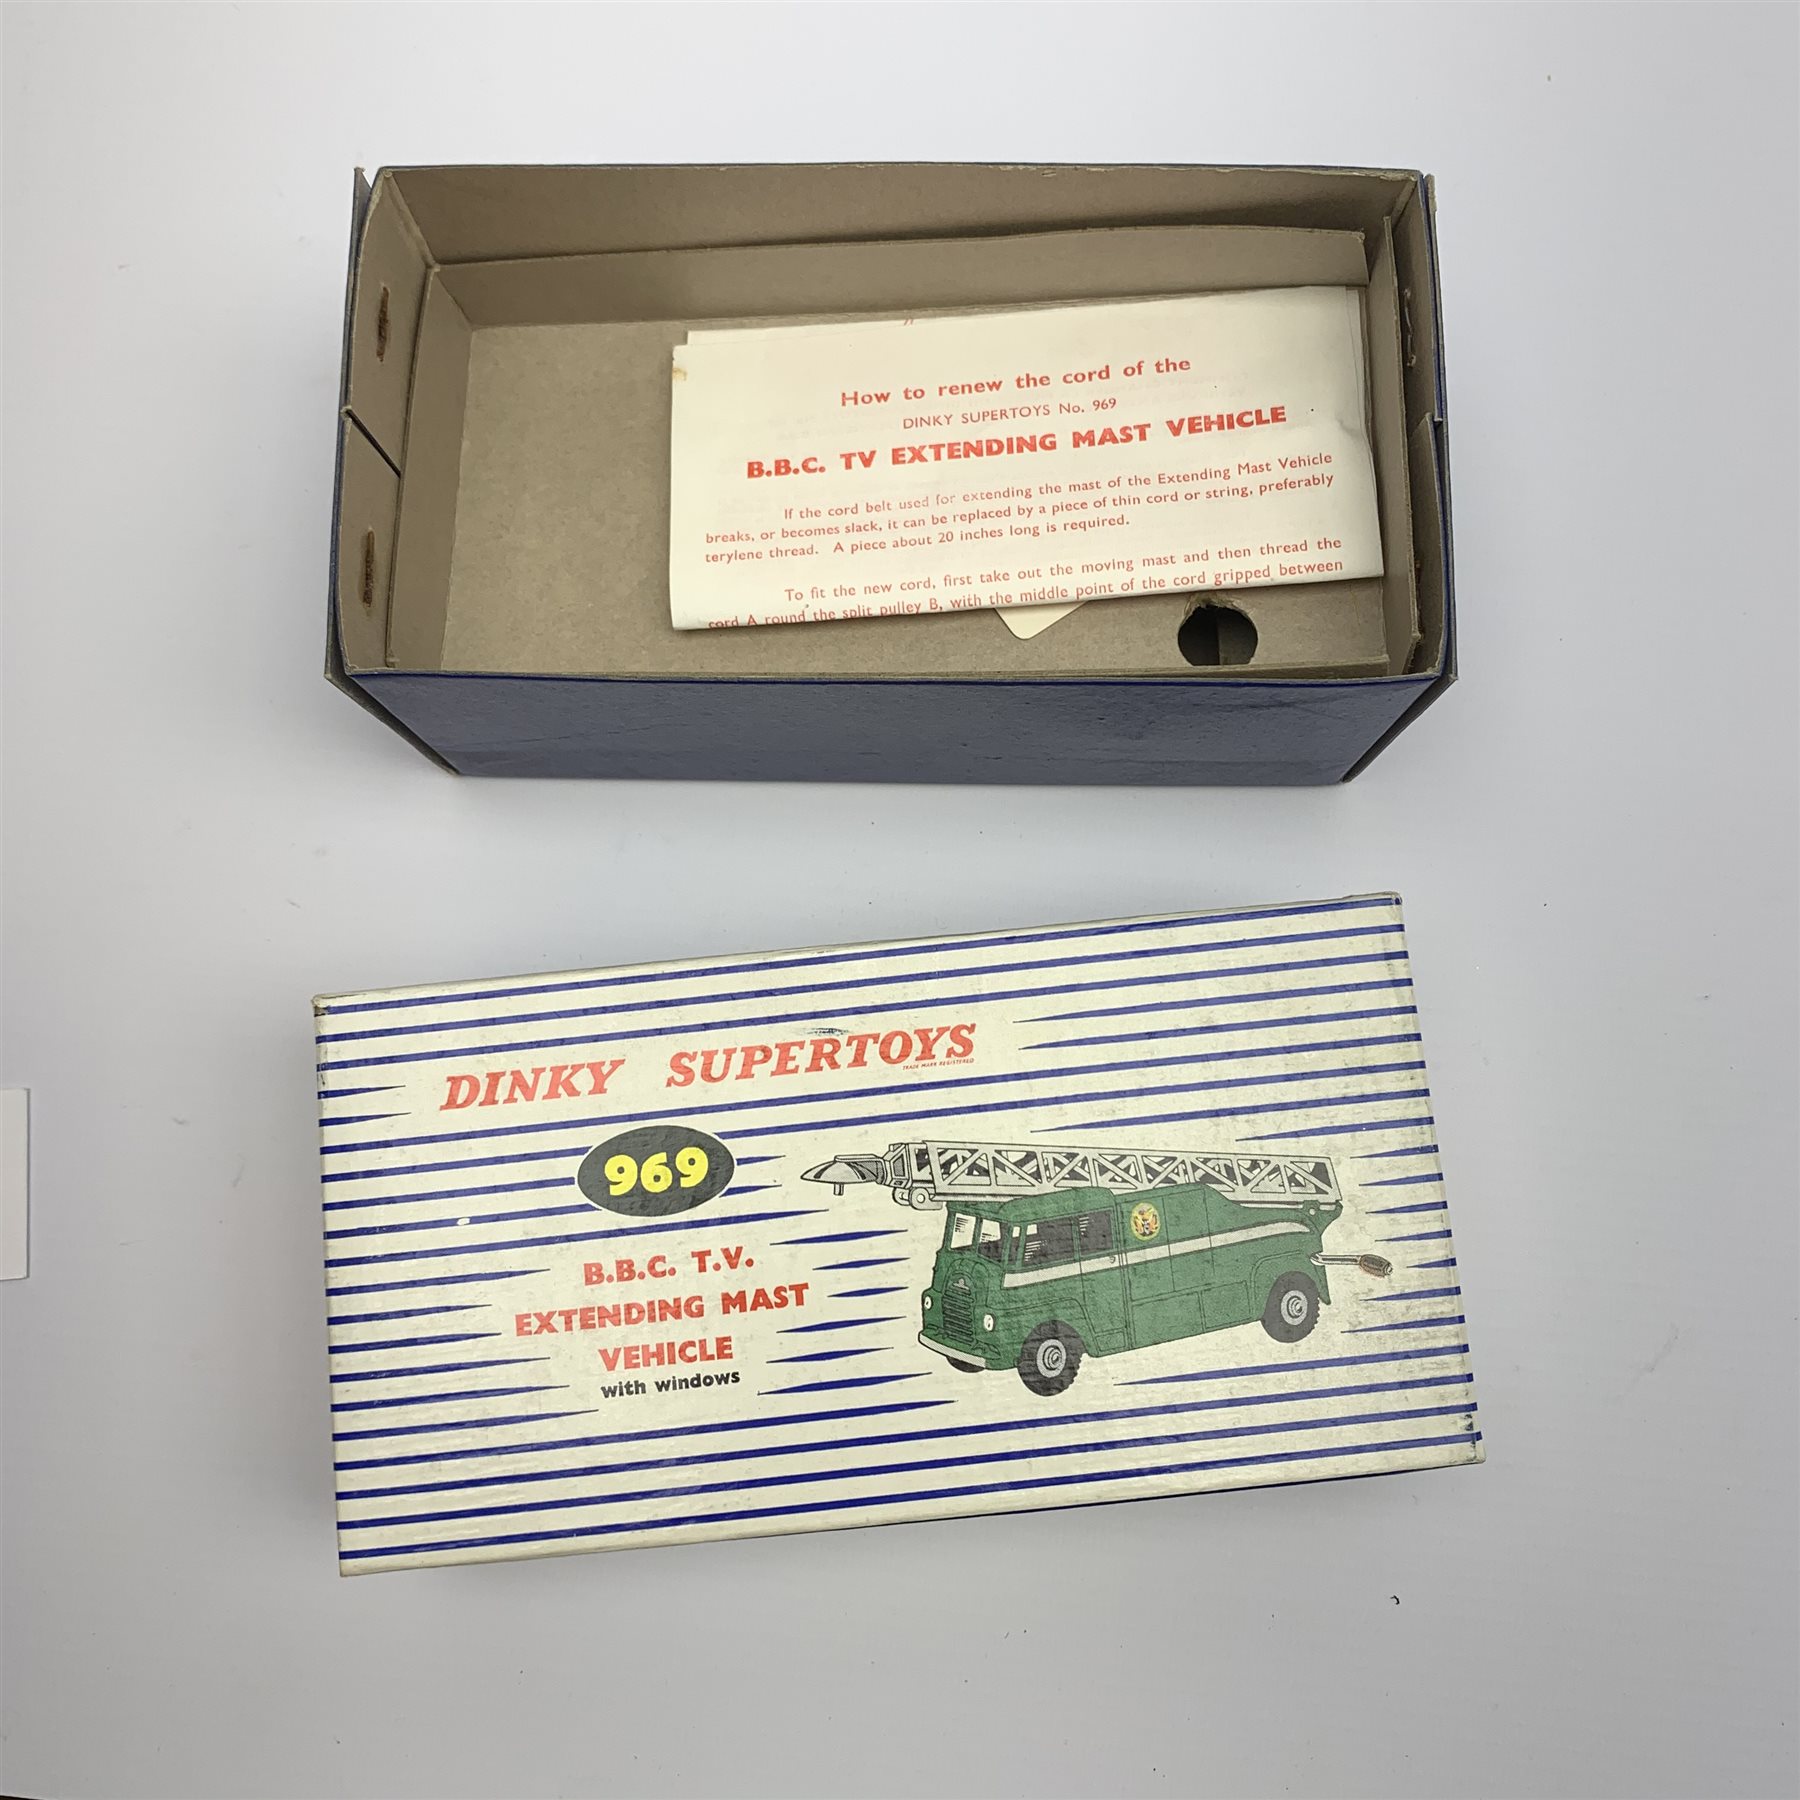 Dinky - Supertoys B.B.C. T.V. Extending Mast Vehicle, No.969, boxed with internal packaging and ins - Image 5 of 8